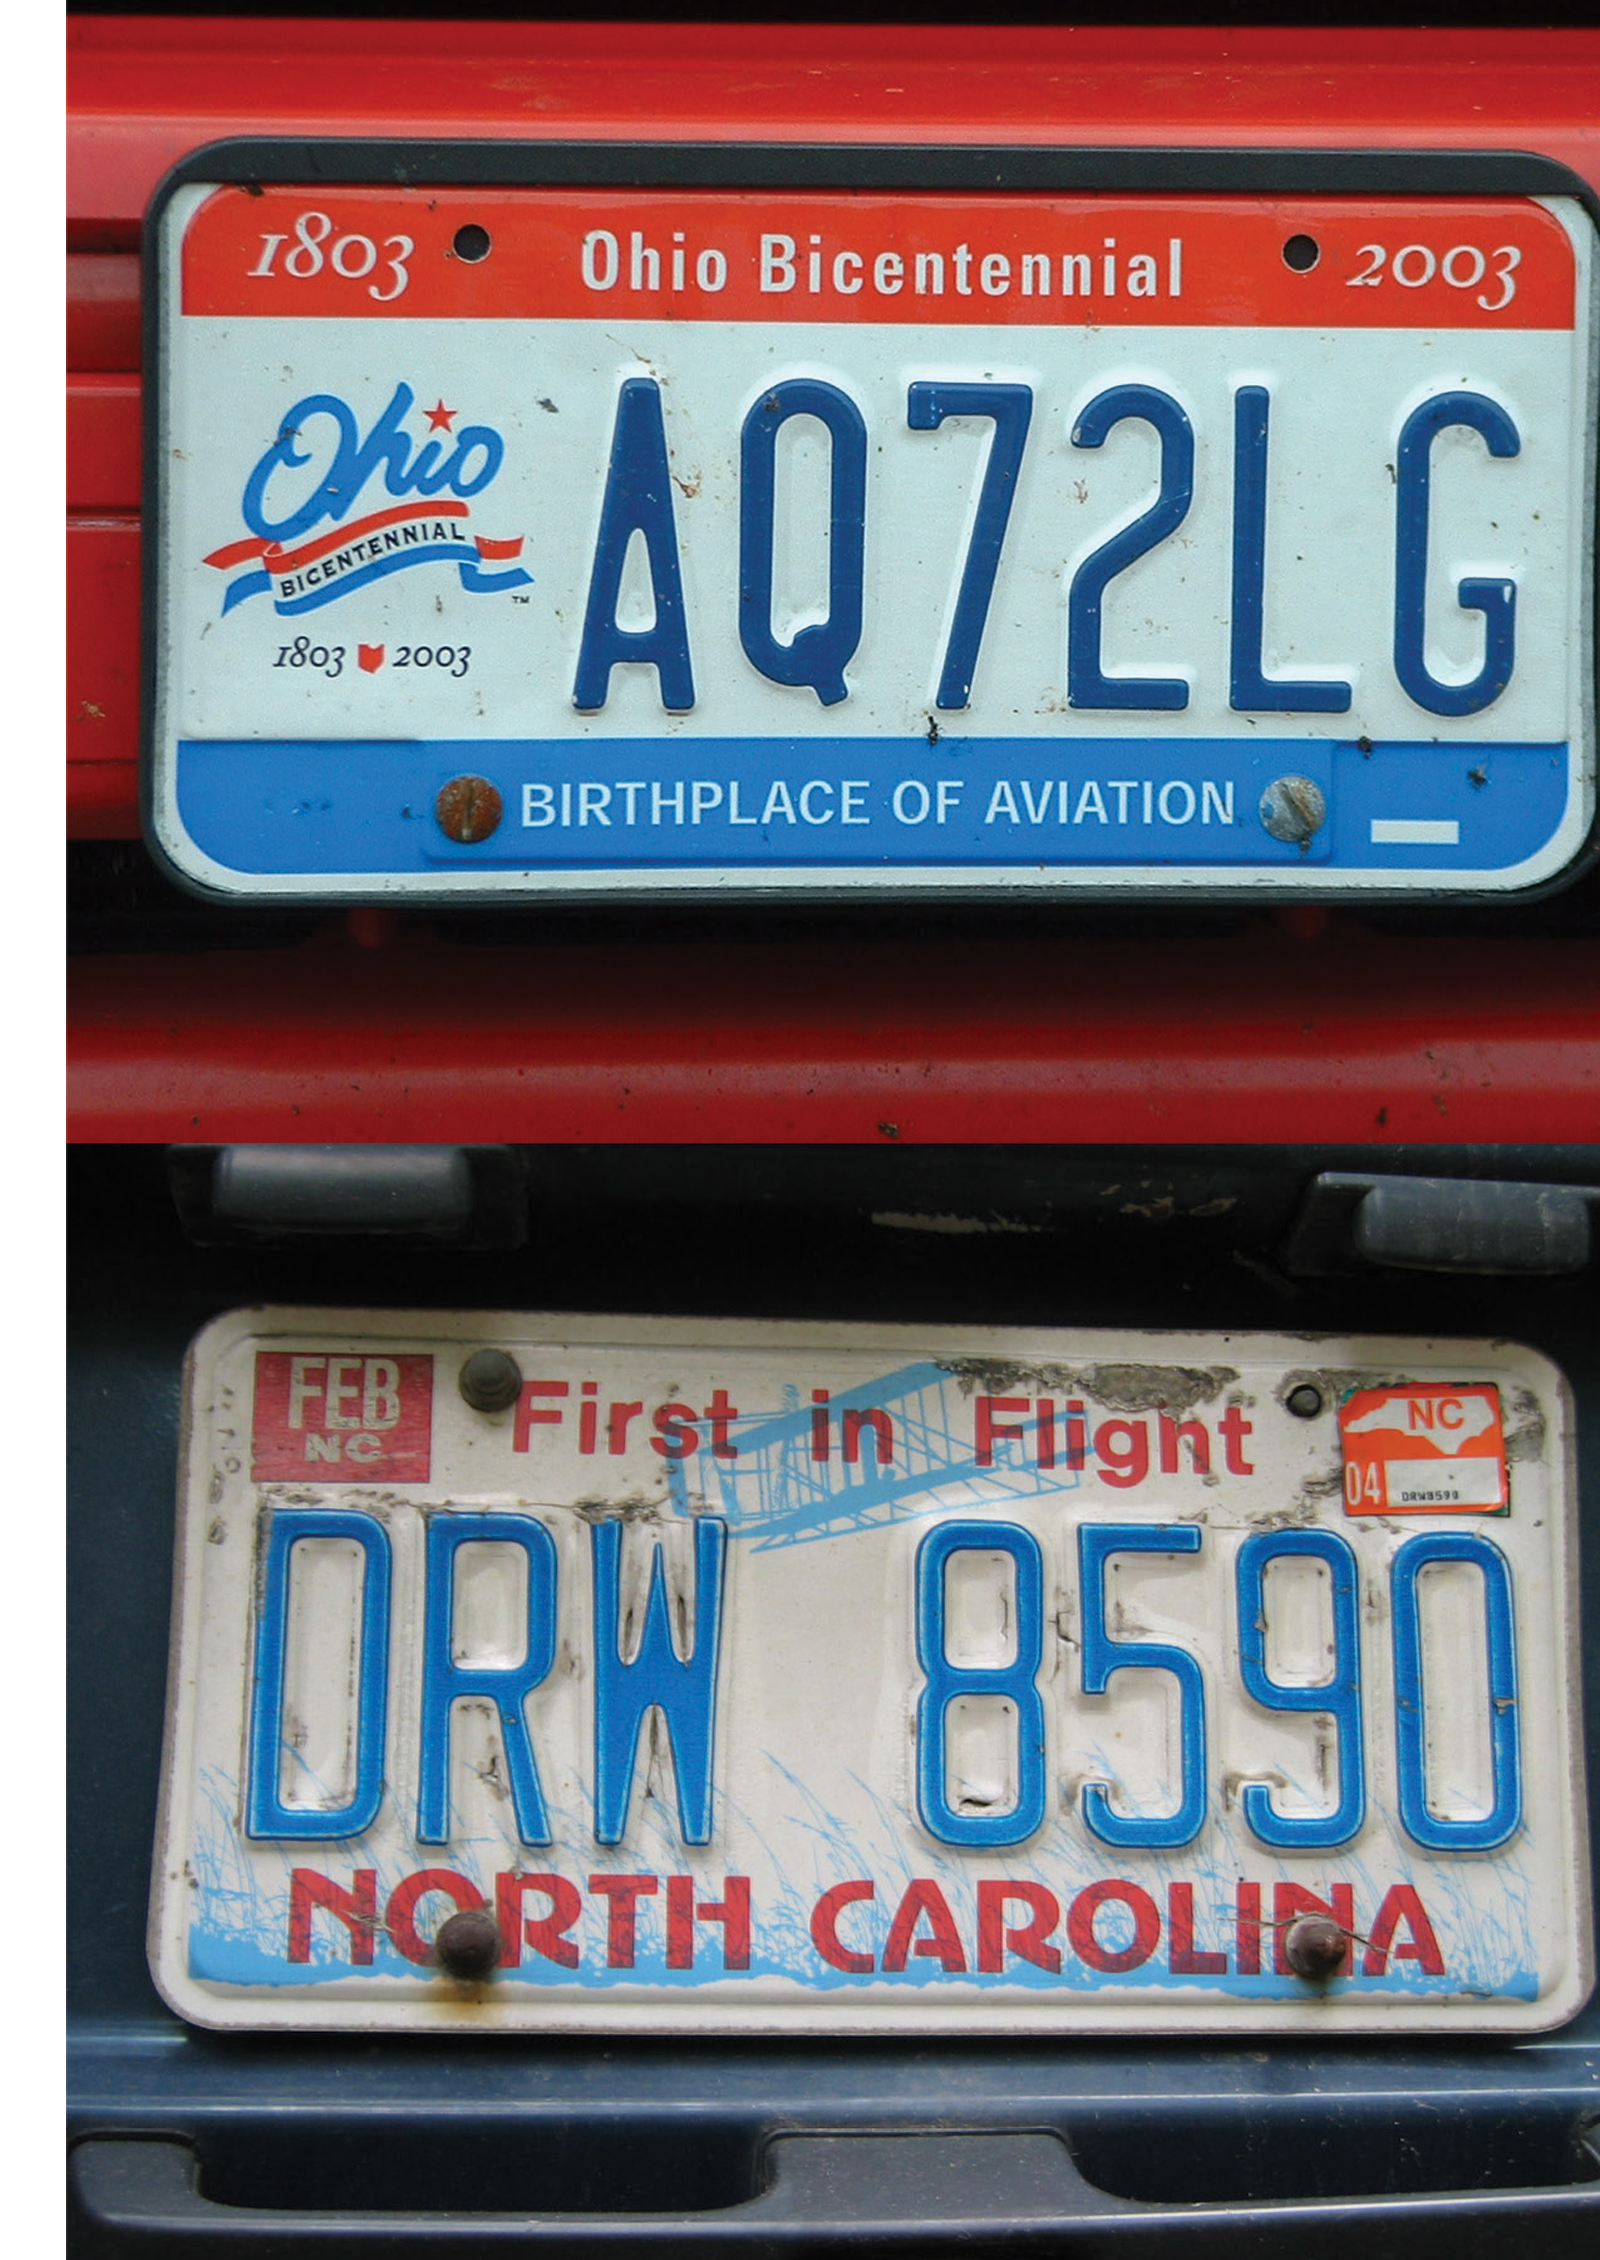 Front of a postcard featuring two color photographs, one of a North Carolina license plate and one of an Ohio license plate, both claiming to be first in flight.